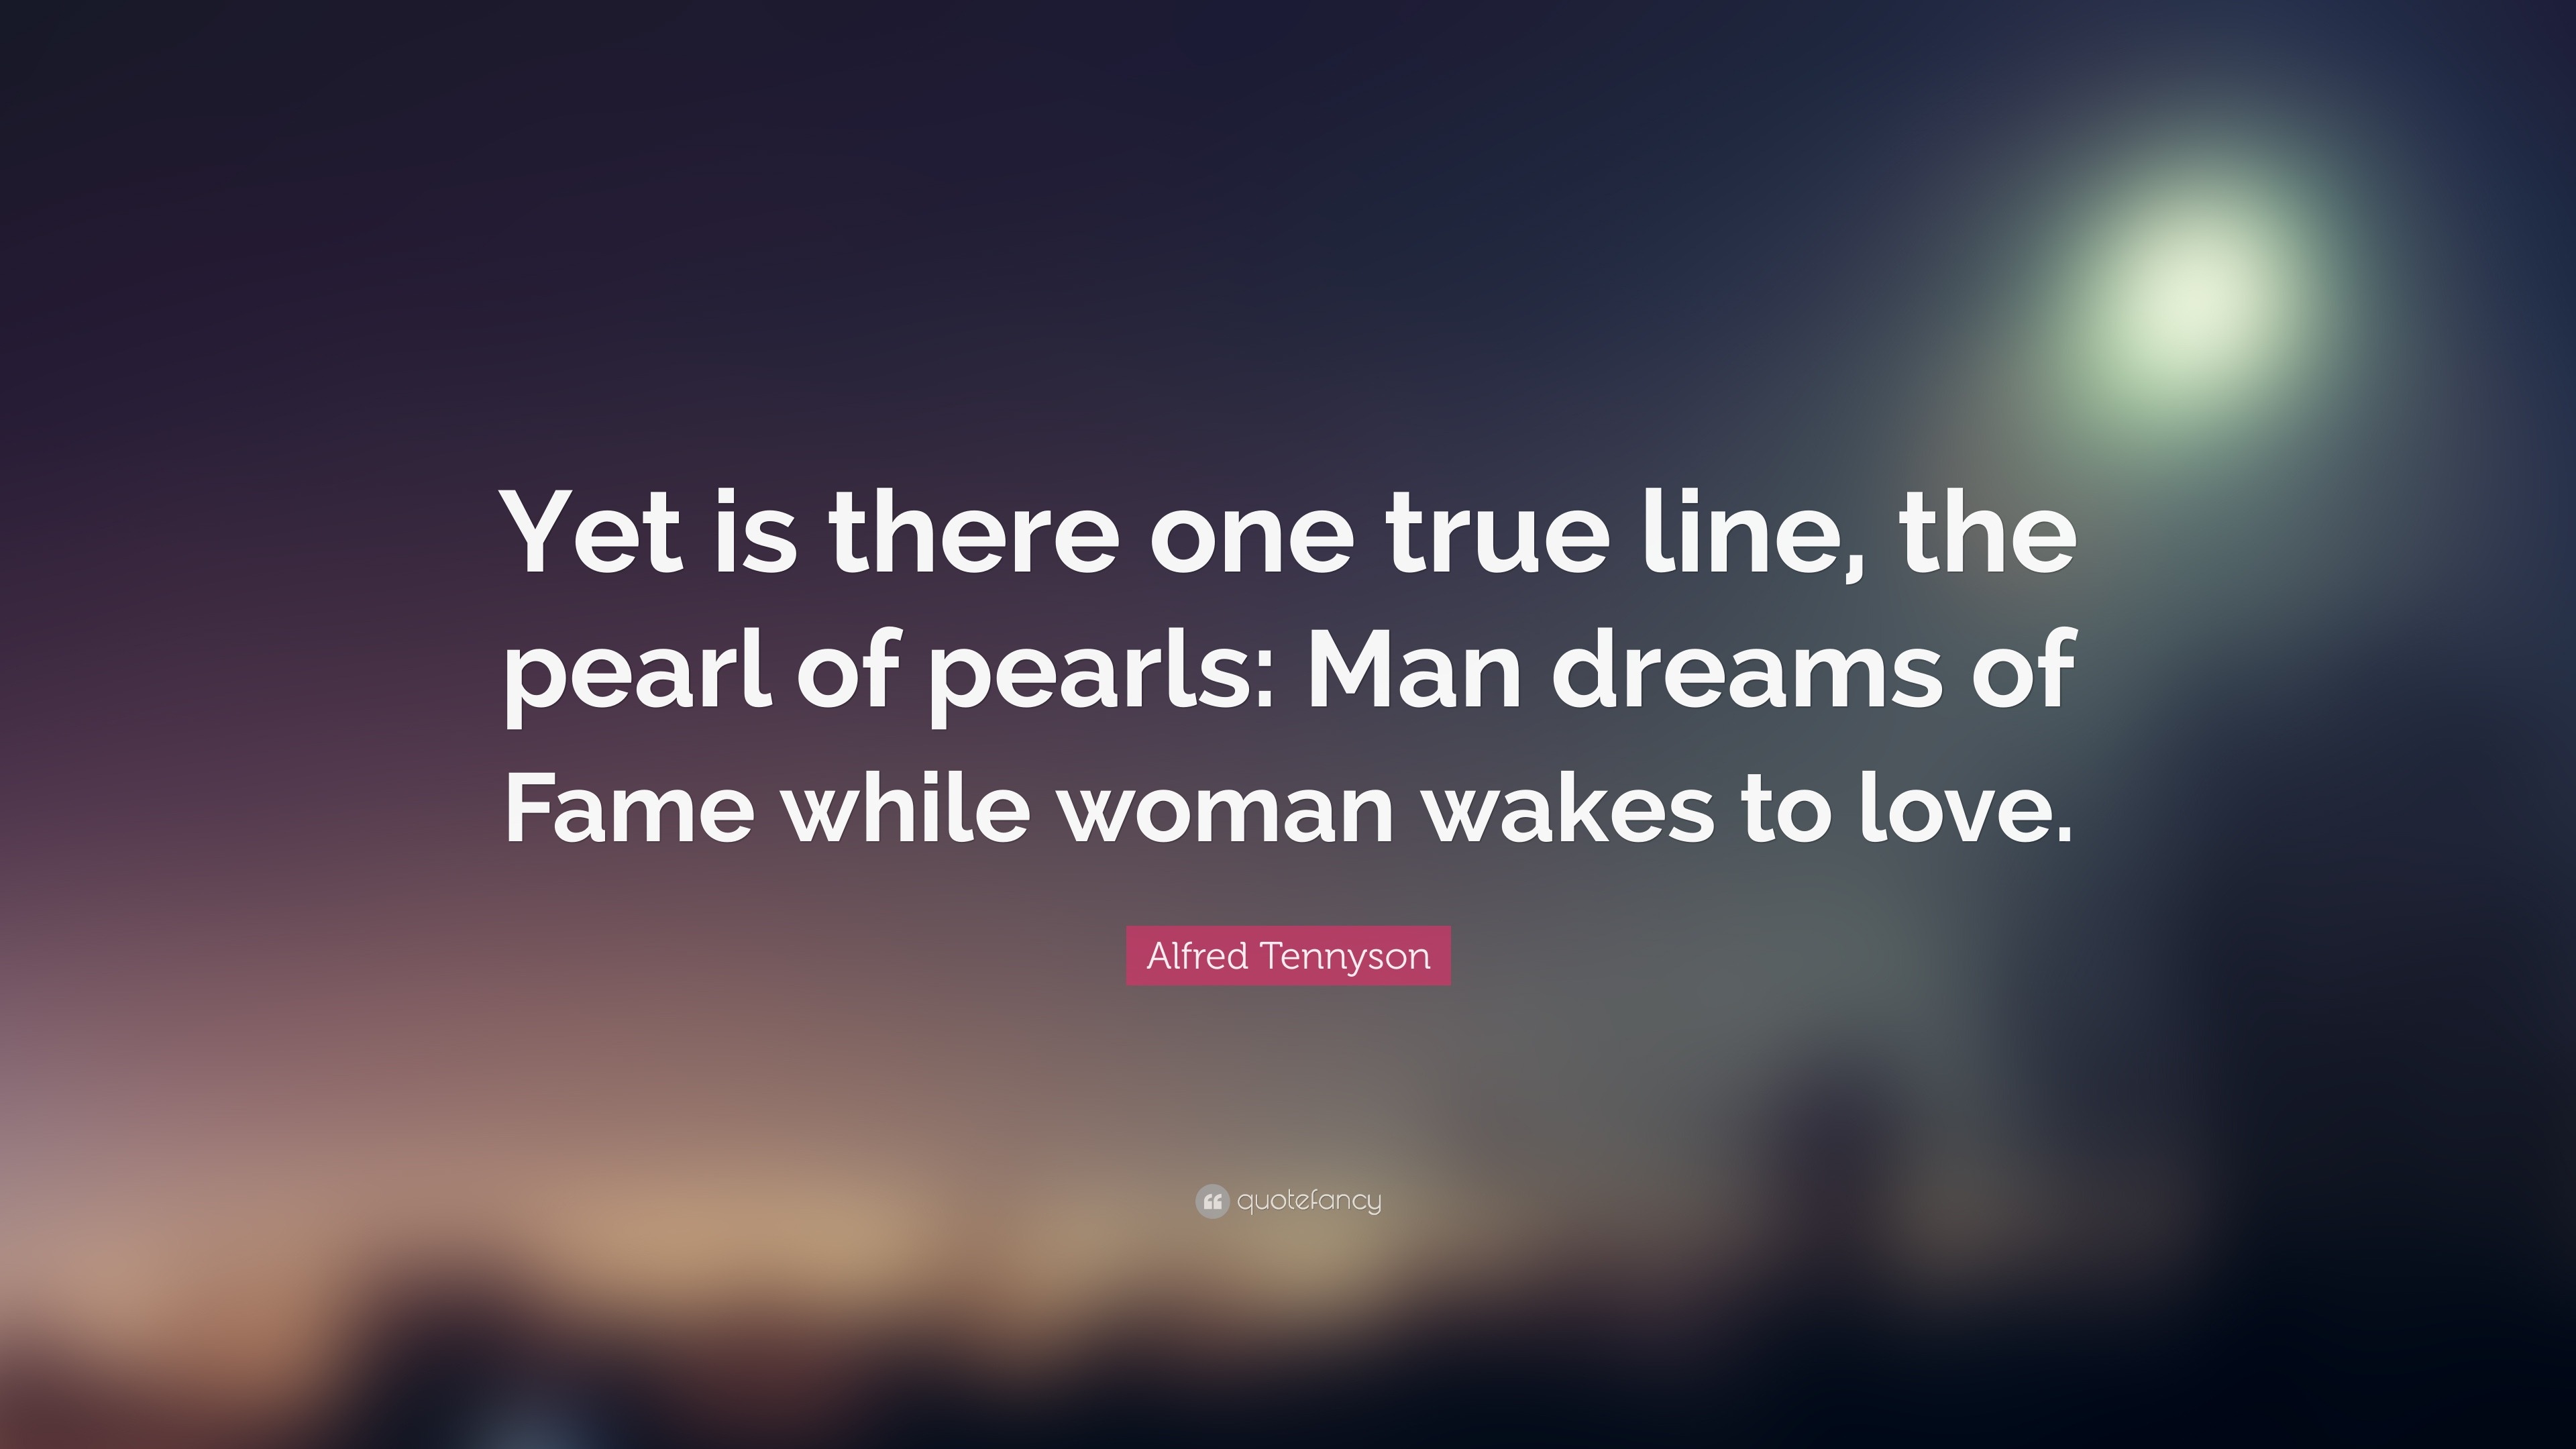 Alfred Tennyson Quote “Yet is there one true line the pearl of pearls